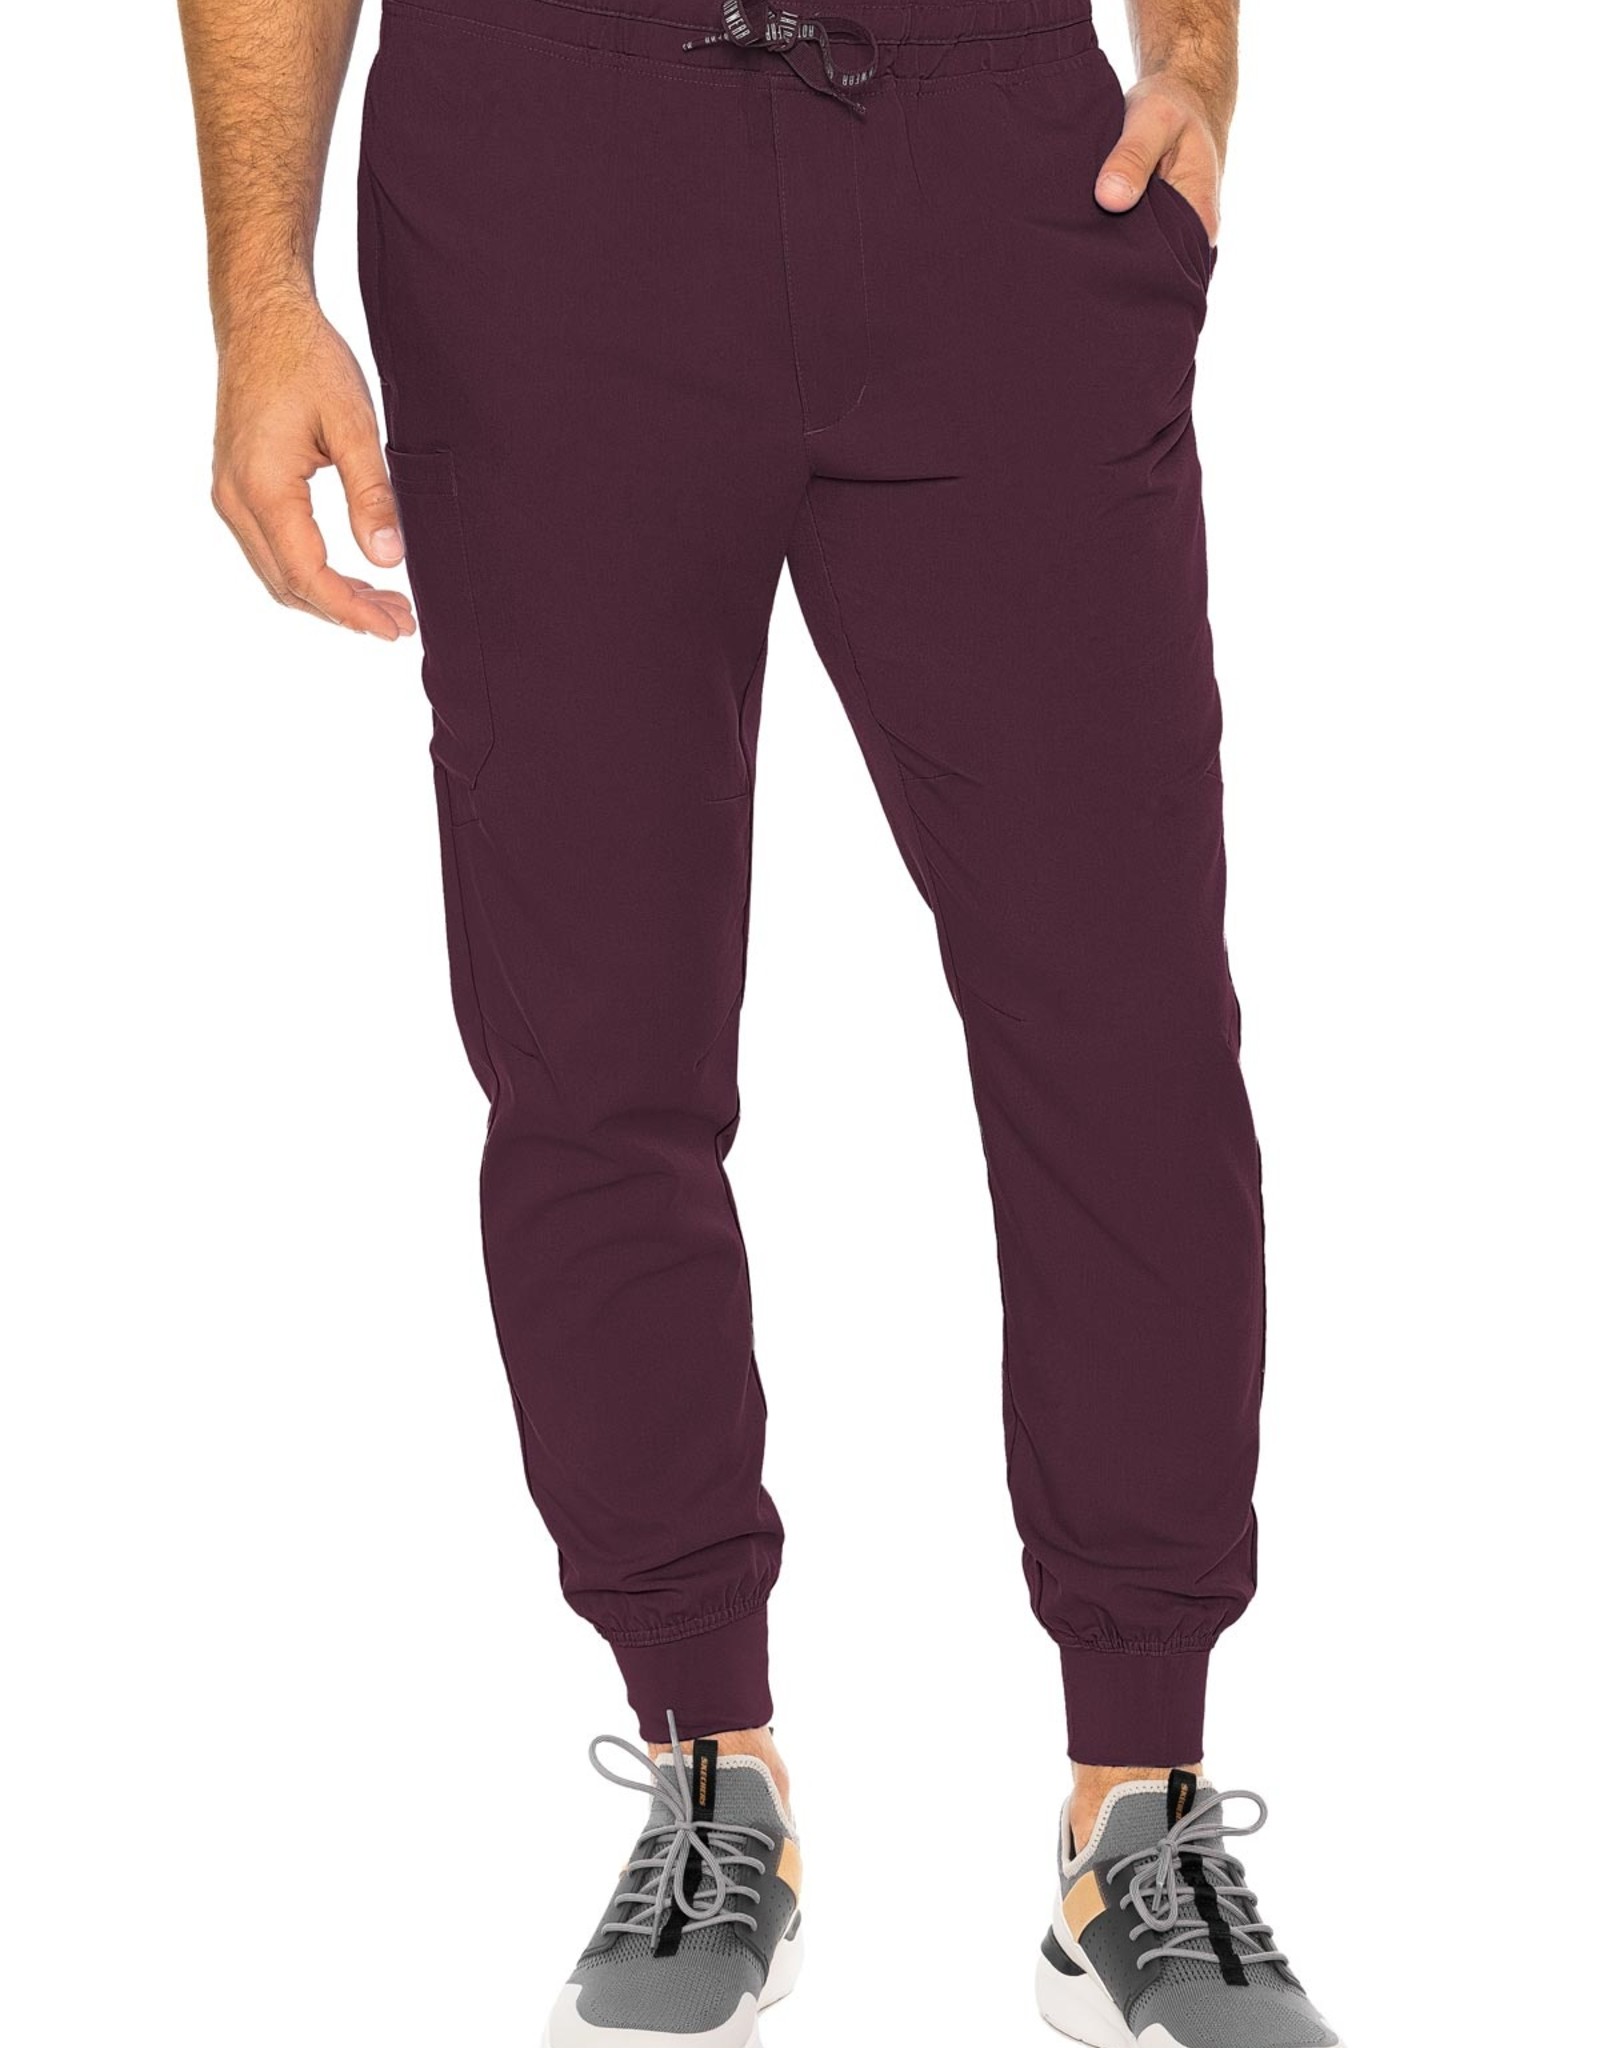 Med Couture Roth Wear Men's "Bowen" Jogger Pant (Tall)